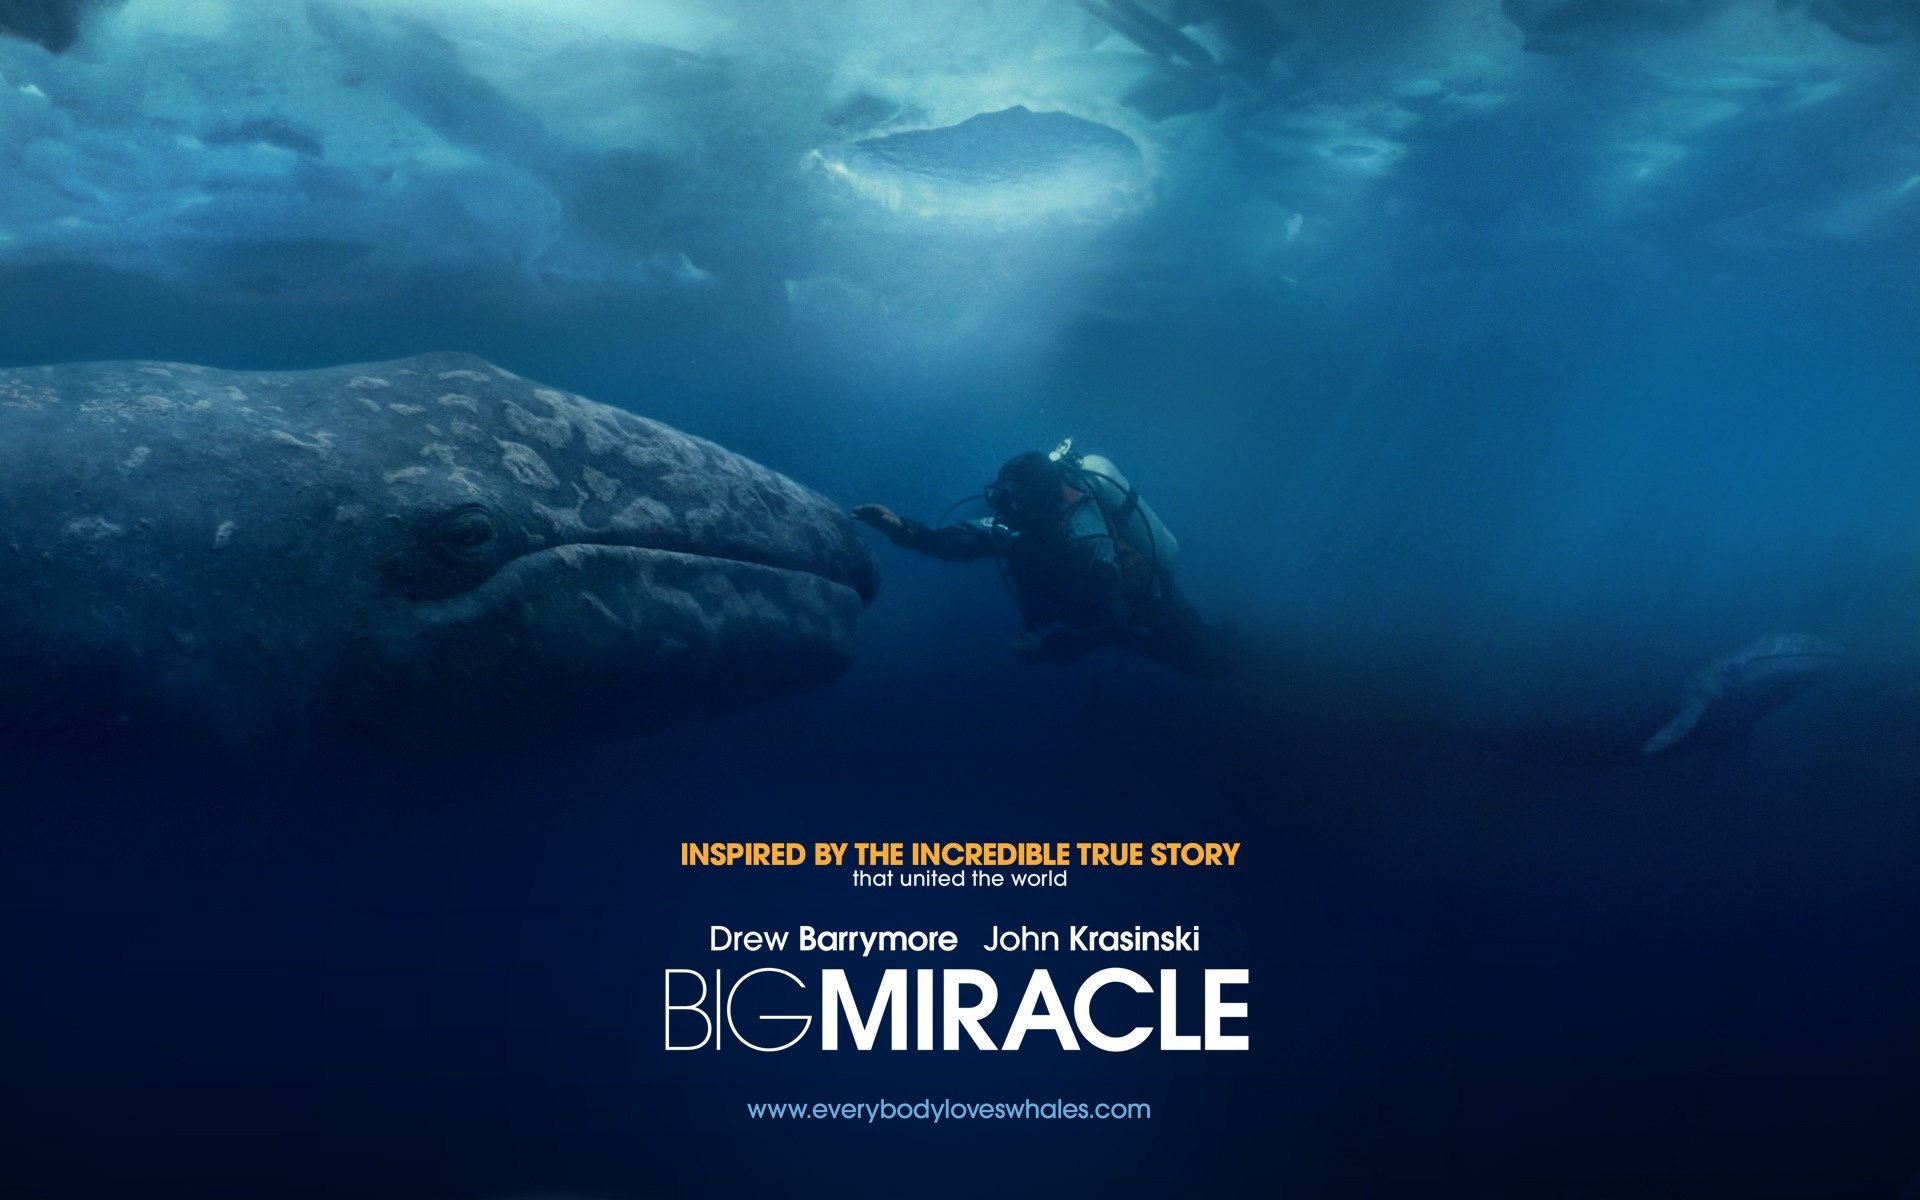 Big Miracle: The film covers 1988 Operation Breakthrough, Movie. 1920x1200 HD Wallpaper.